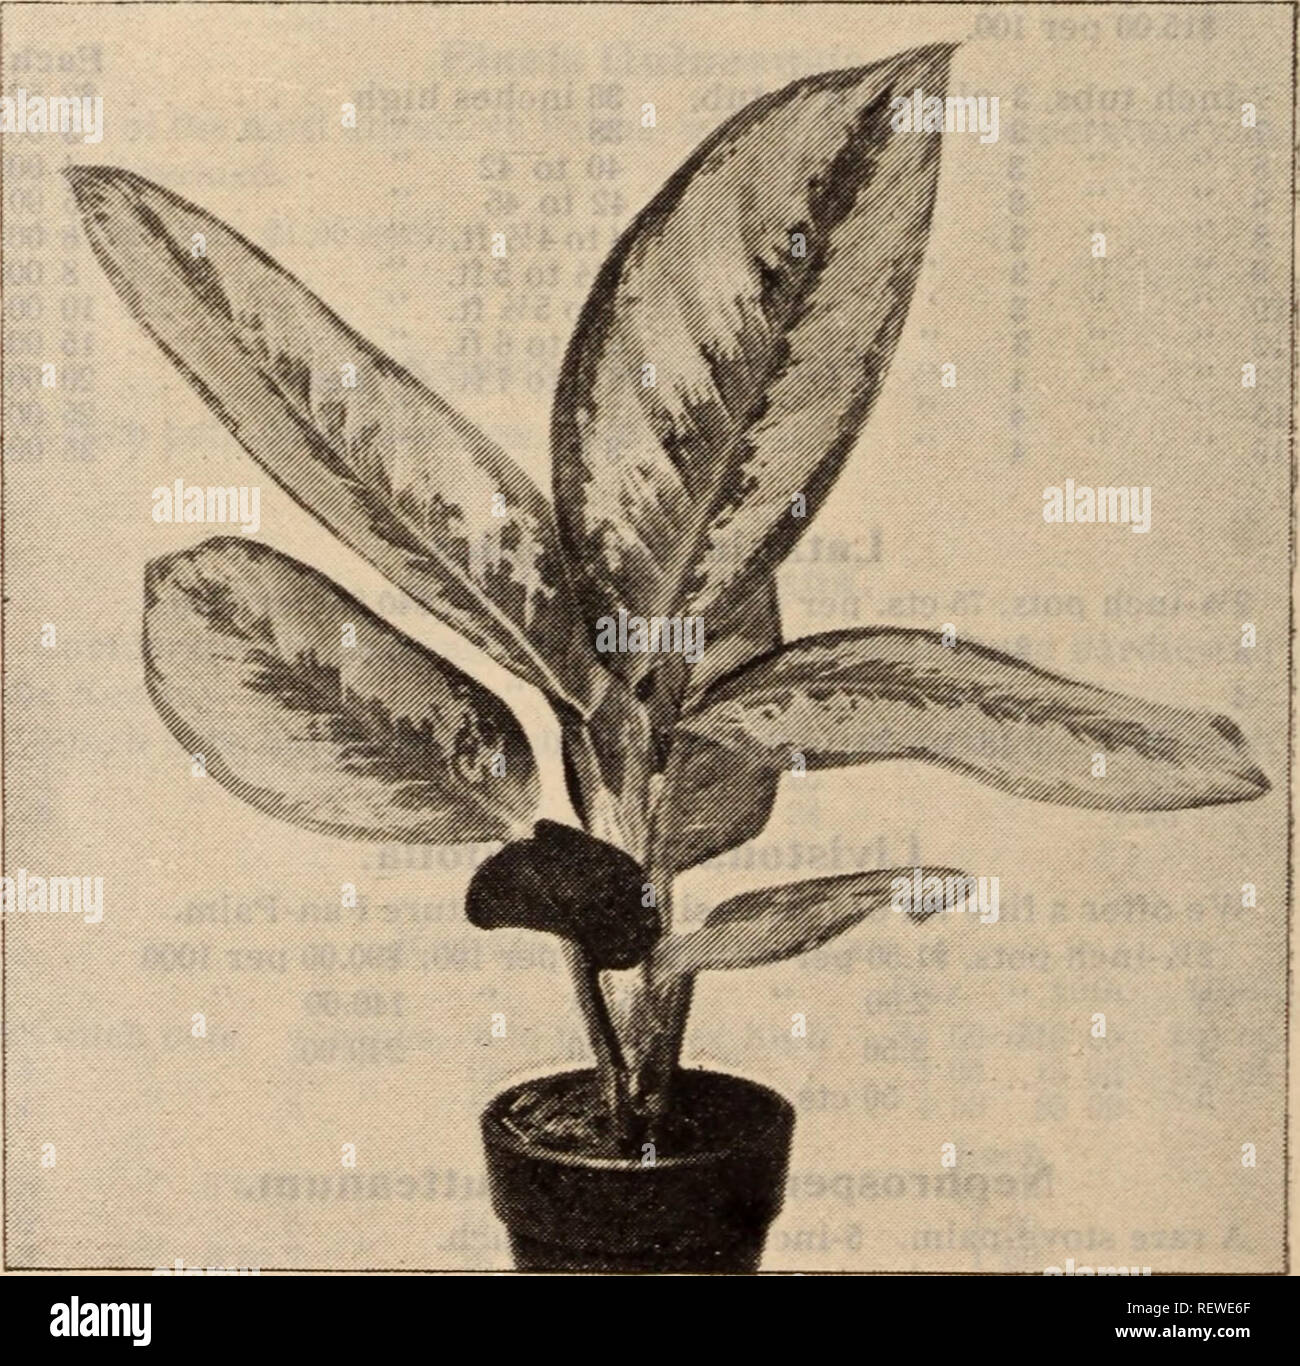 . Dreer's wholesale price list / Henry A. Dreer.. Nursery Catalogue. FORCING RHODODENDRON Smilax. 2'4-inch pots, 50 cts. per dozen; $3.50 per 100. Swainsona. Qaleslfolia Alba. 3-inch pots, $1.00 per doz.; $7.00 per 100. Stigmaphyllon Ciliatum. (Brazilian Golden or Orchid Vine.) One of our most beautiful flowering climbers, either for the greenhouse or open air. 15 cts. each; $1.50 per doz. Sparmania Africana. A good, winter flowering plant for the amateur's conservatory or window garden. 3-inch pots, 15 cts. each; $1.50 per dozen. Thunbergia Harrisii. A splendid winter flowering greenhouse cli Stock Photo